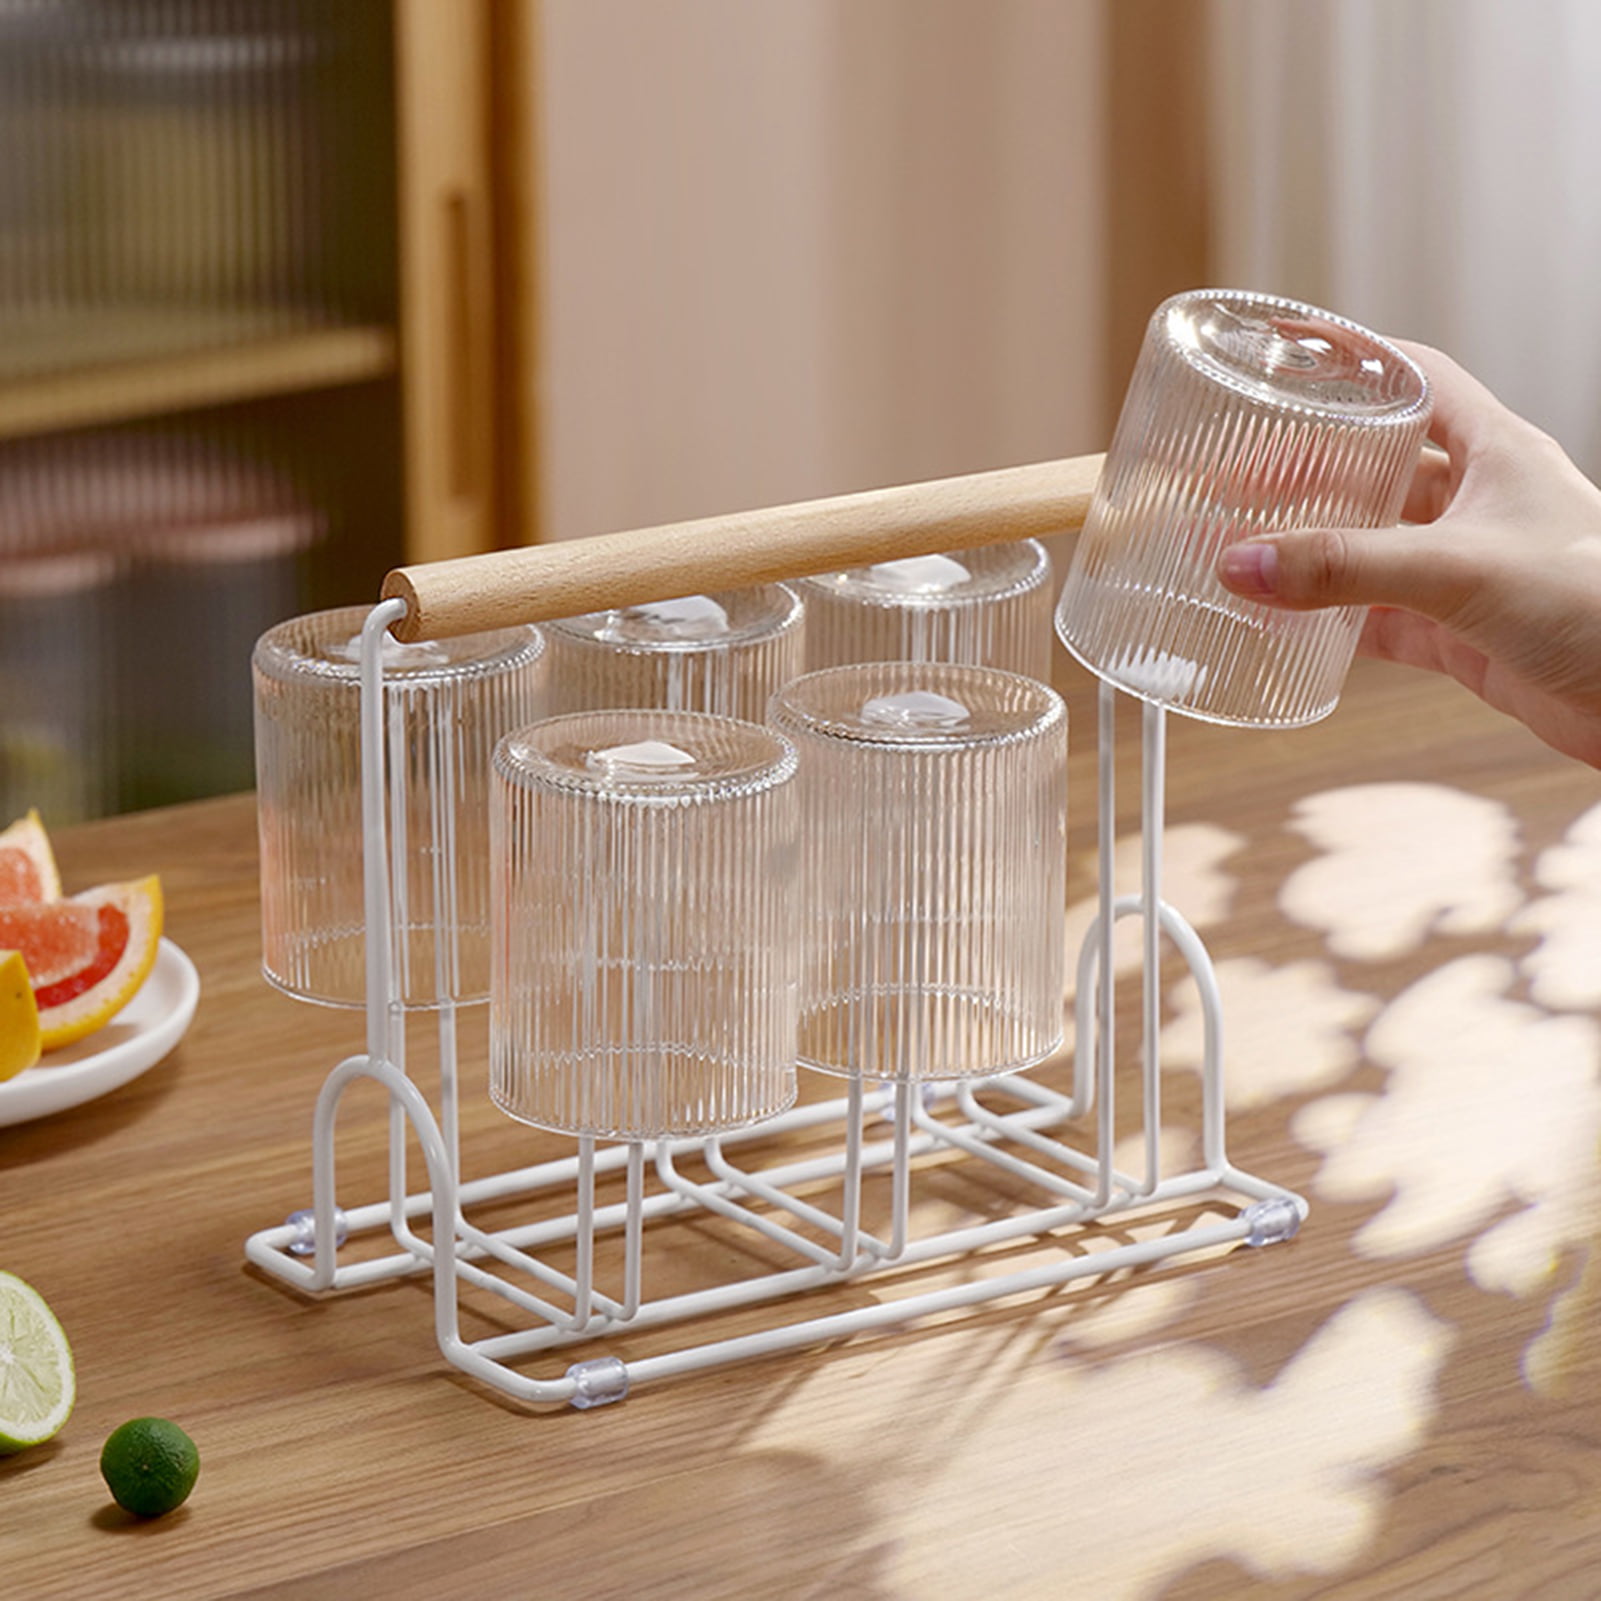 1pc Black Iron Home Use Cup Drying Rack, Living Room Glass Cup Storage Rack,  Hanging Cup Holder For 6 Cups In Kitchen